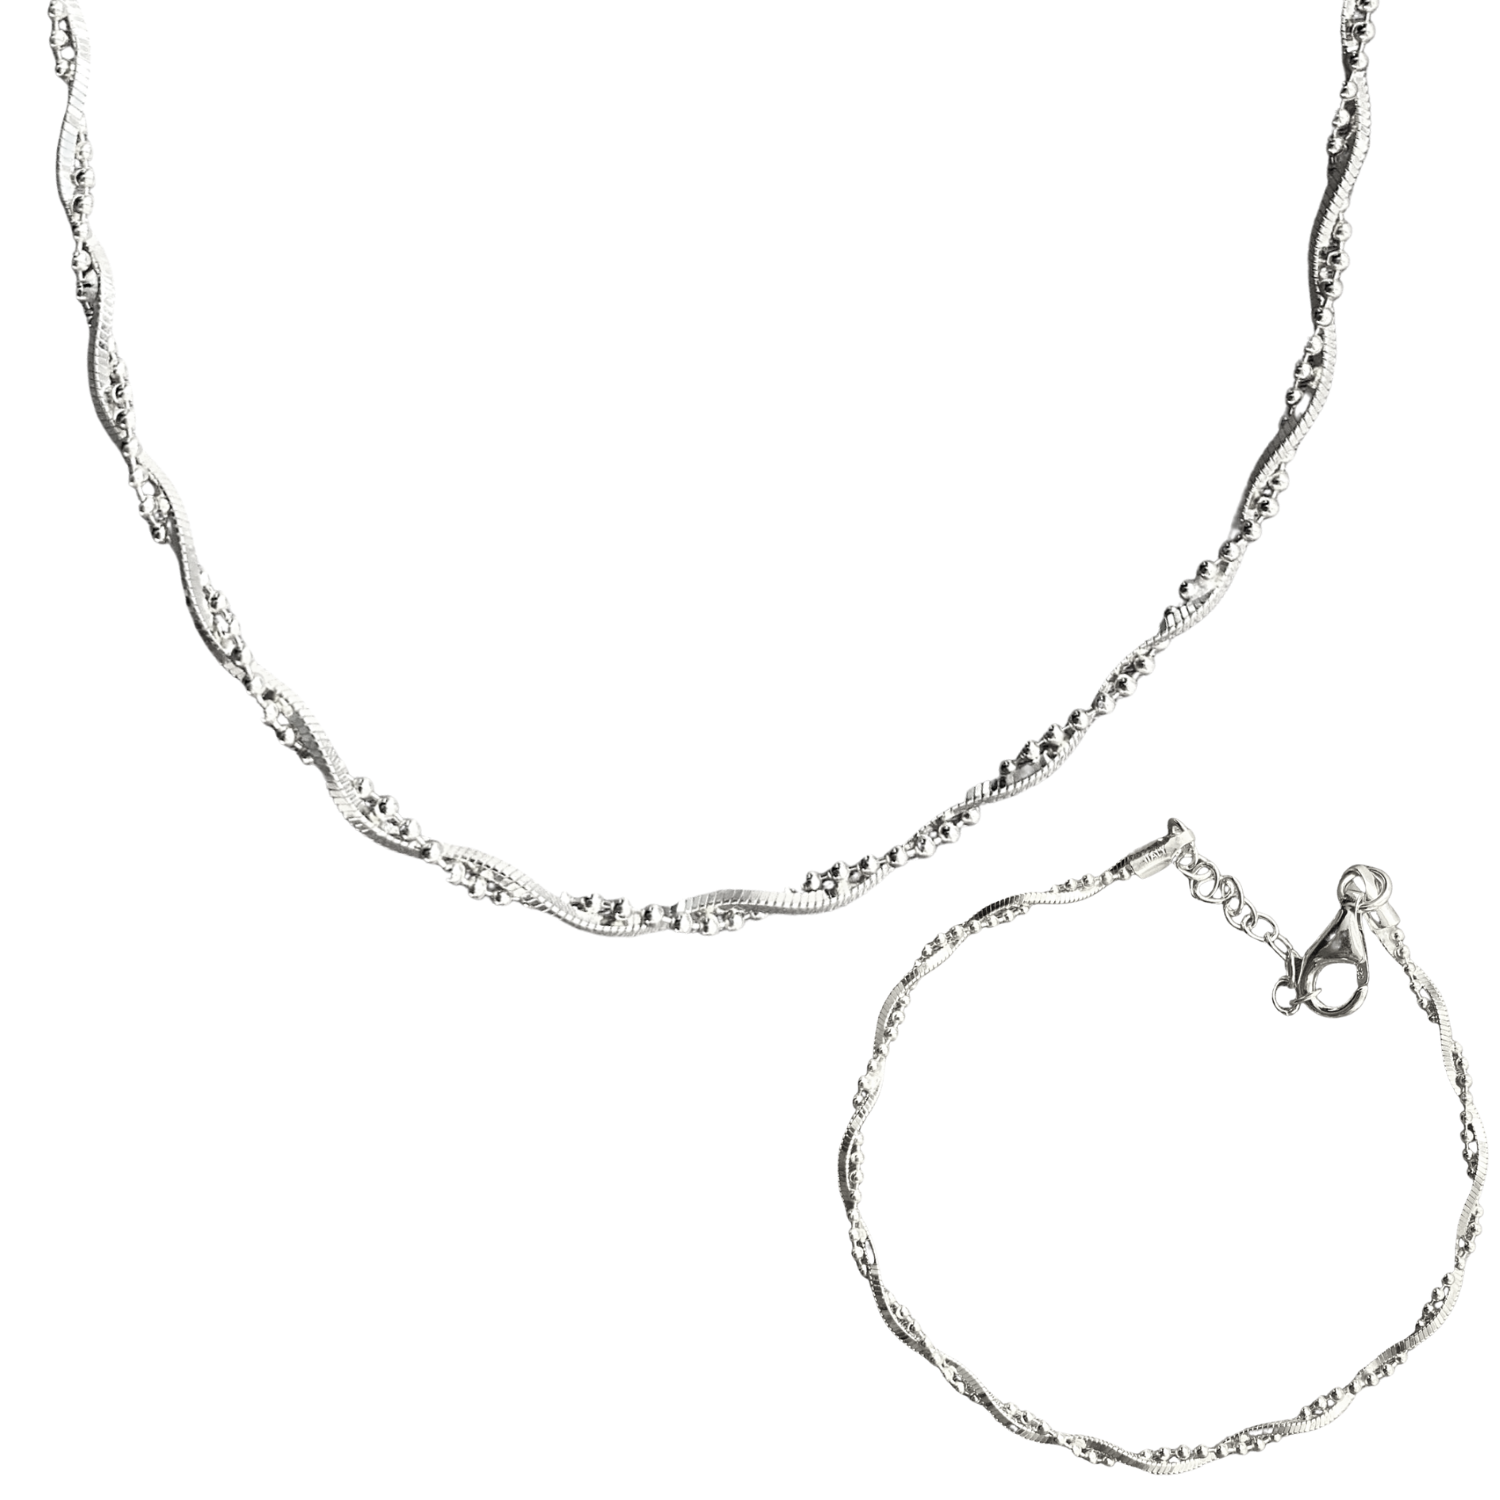 Twisted Beads Sterling Silver Chain Necklace and Bracelet Set